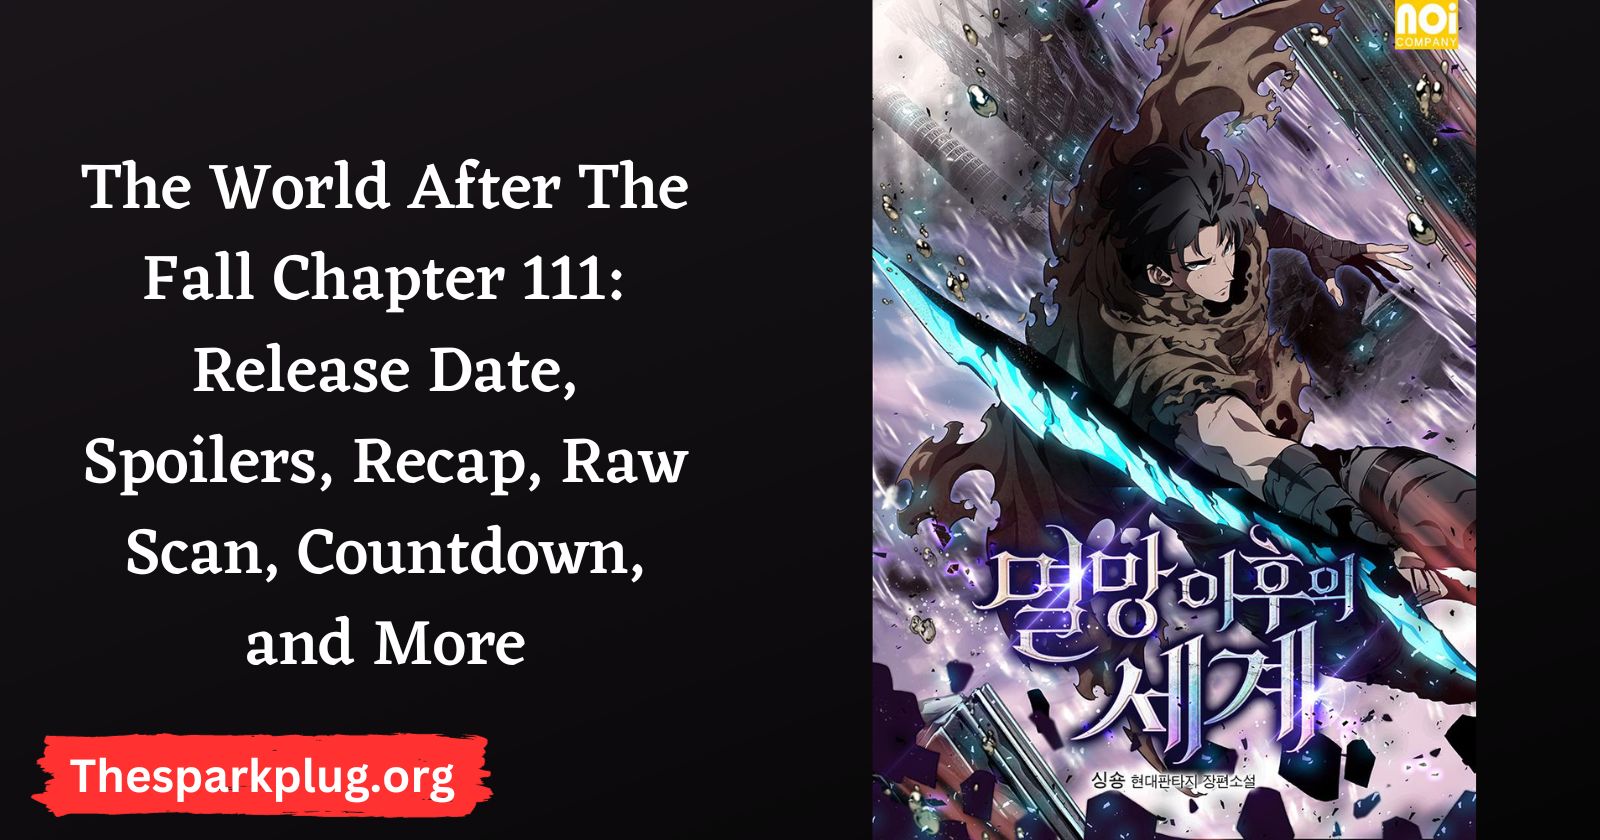 The World After The Fall Chapter 111: Release Date, Spoilers, Recap, Raw Scan, Countdown, and More